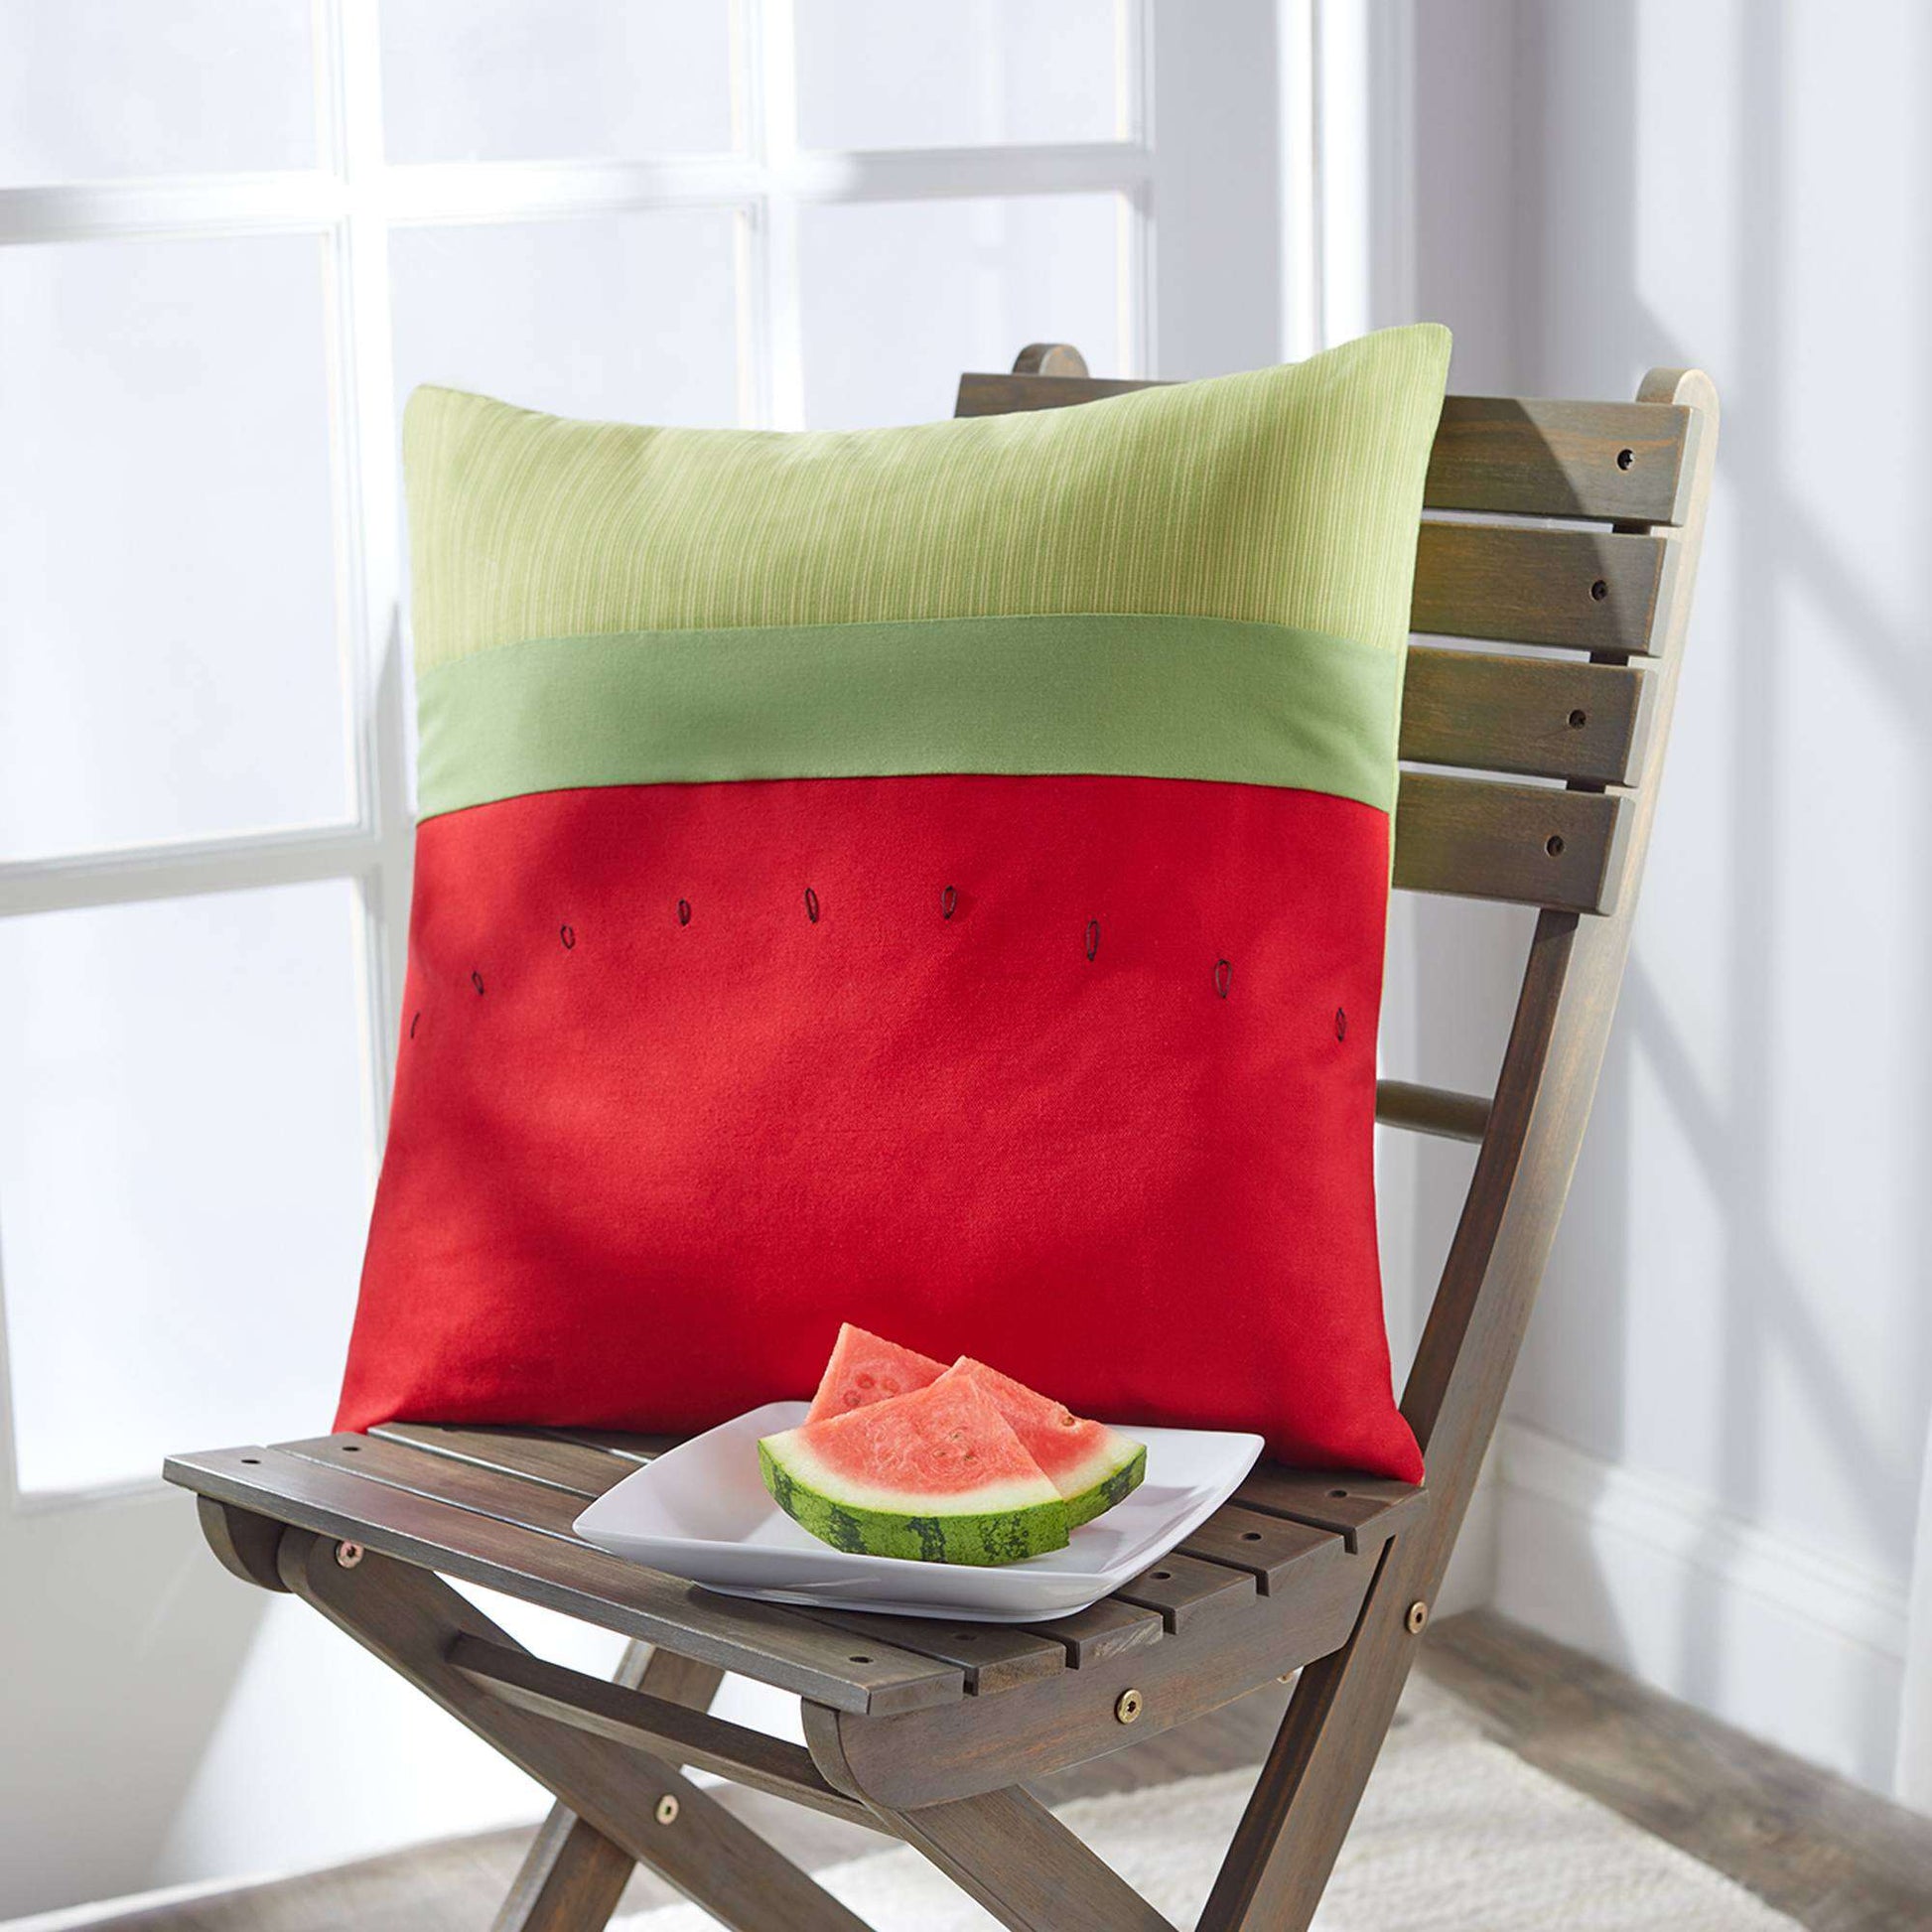 Free Coats & Clark Watermelon Patio Pillow For Outdoor Decor Pattern